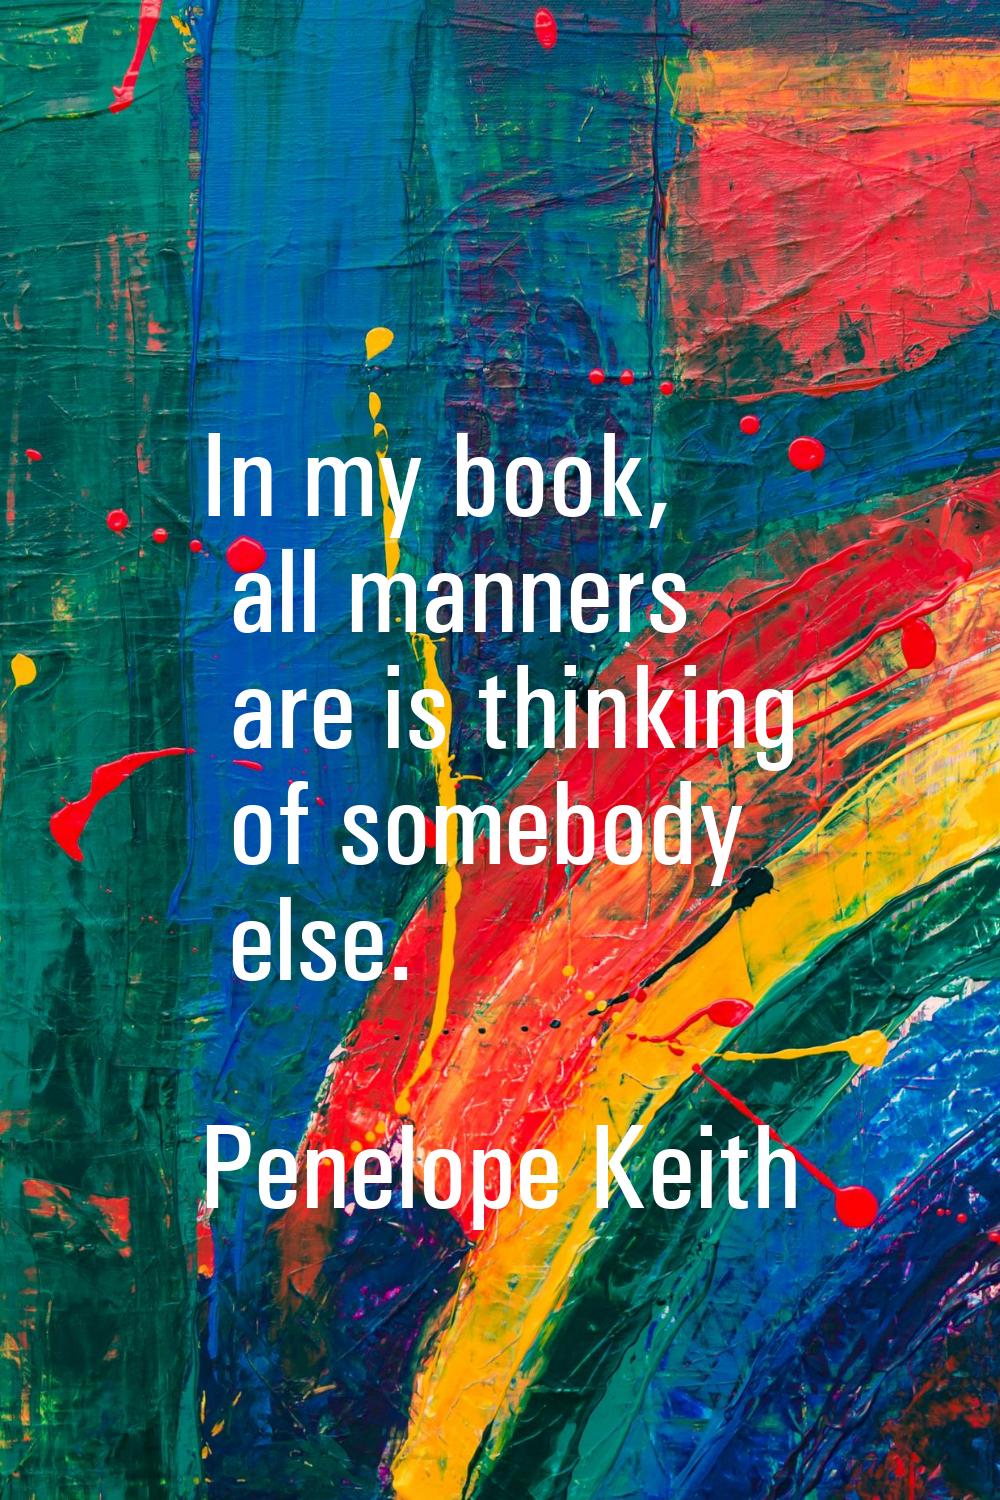 In my book, all manners are is thinking of somebody else.